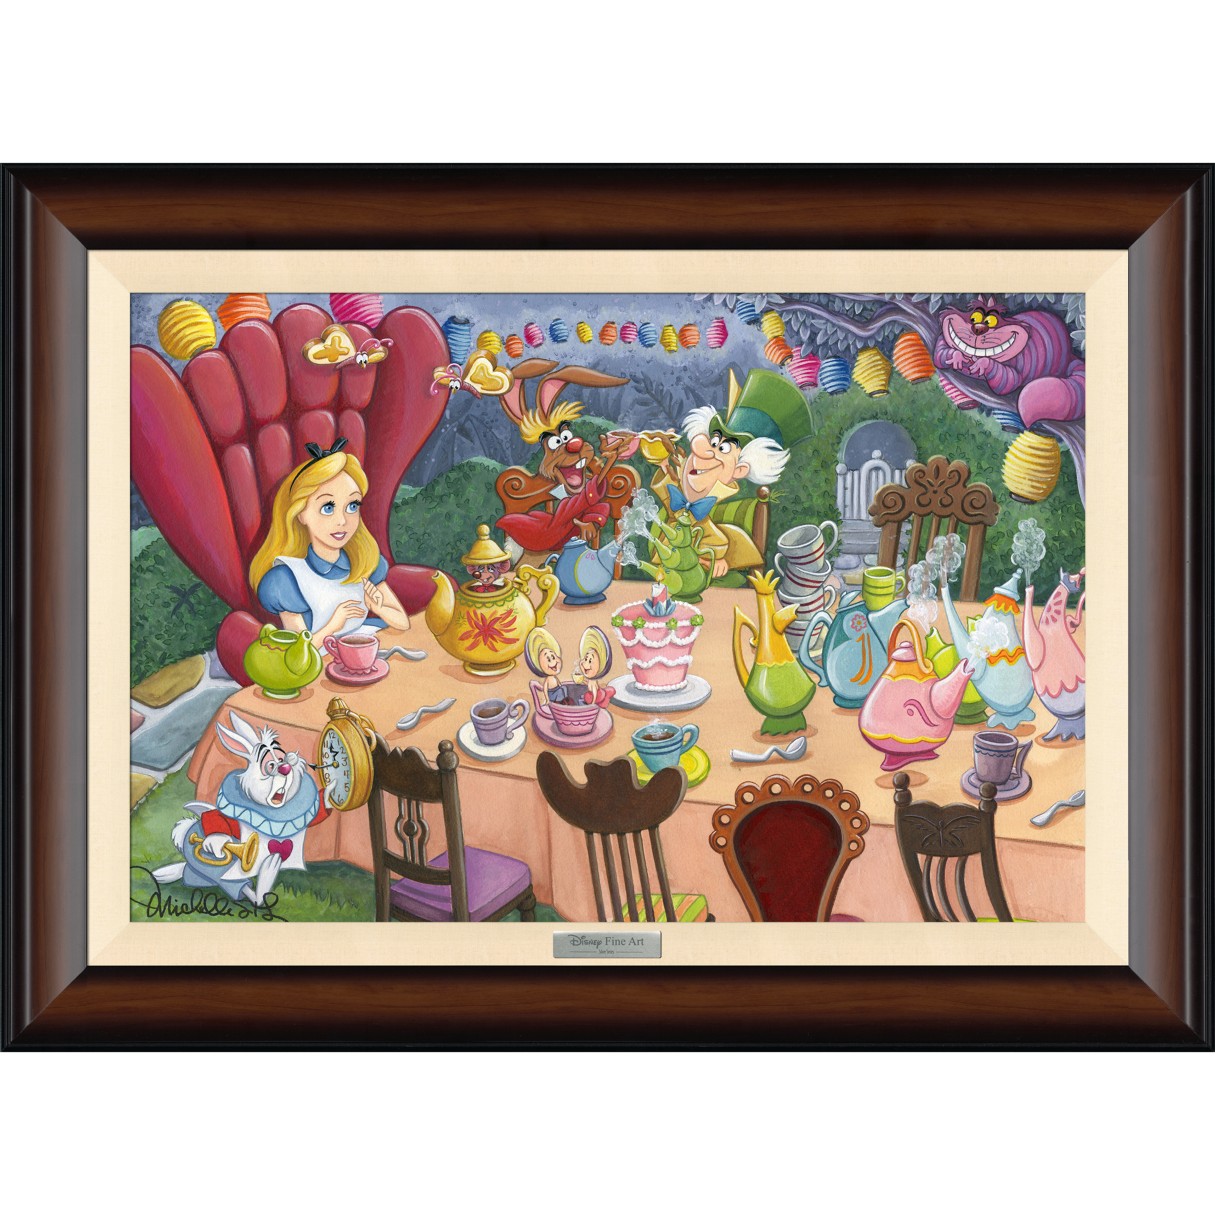 Alice in Wonderland, Alice and Cheshire Cat available as Framed Prints,  Photos, Wall Art and Photo Gifts